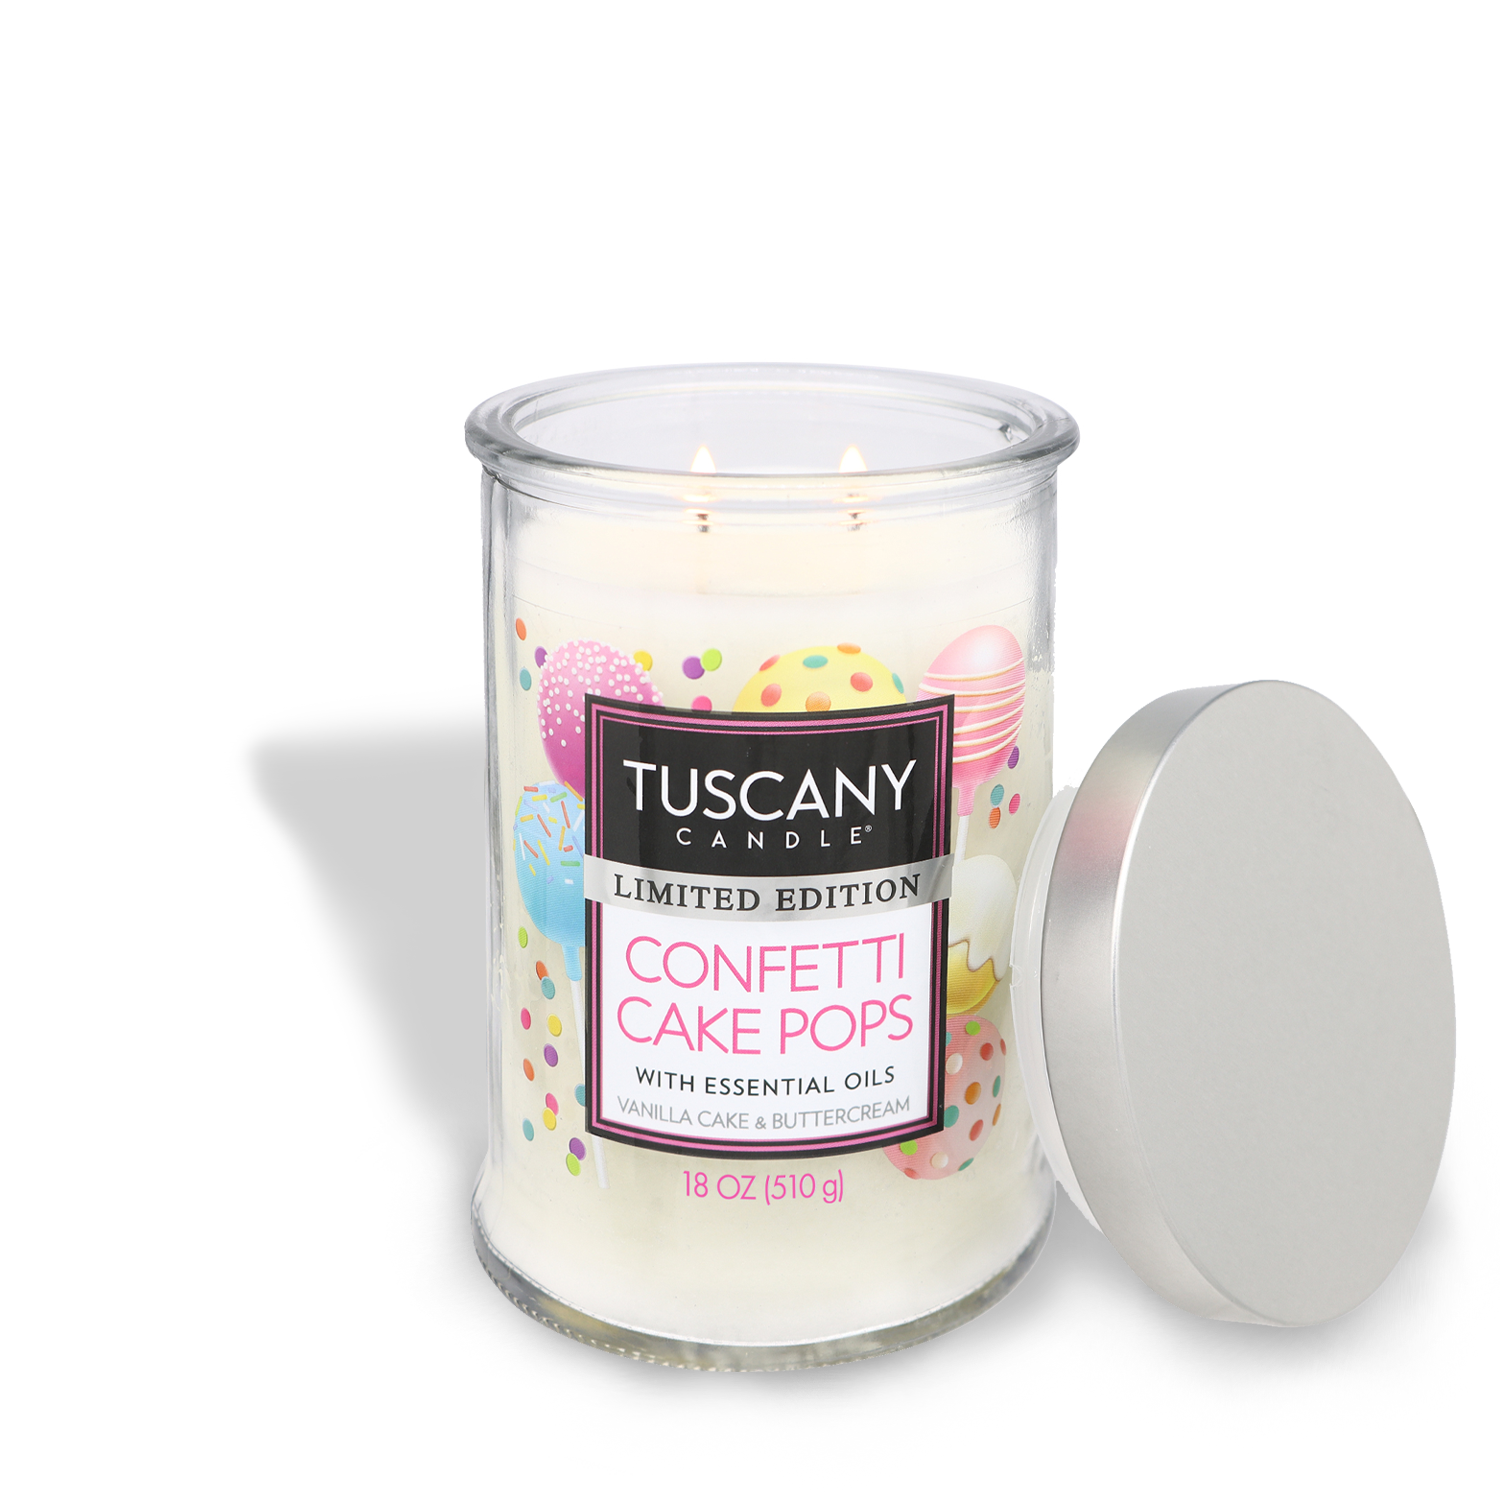 This Confetti Cake Pops scented jar candle is perfect for summer from Tuscany Candle® SEASONAL.